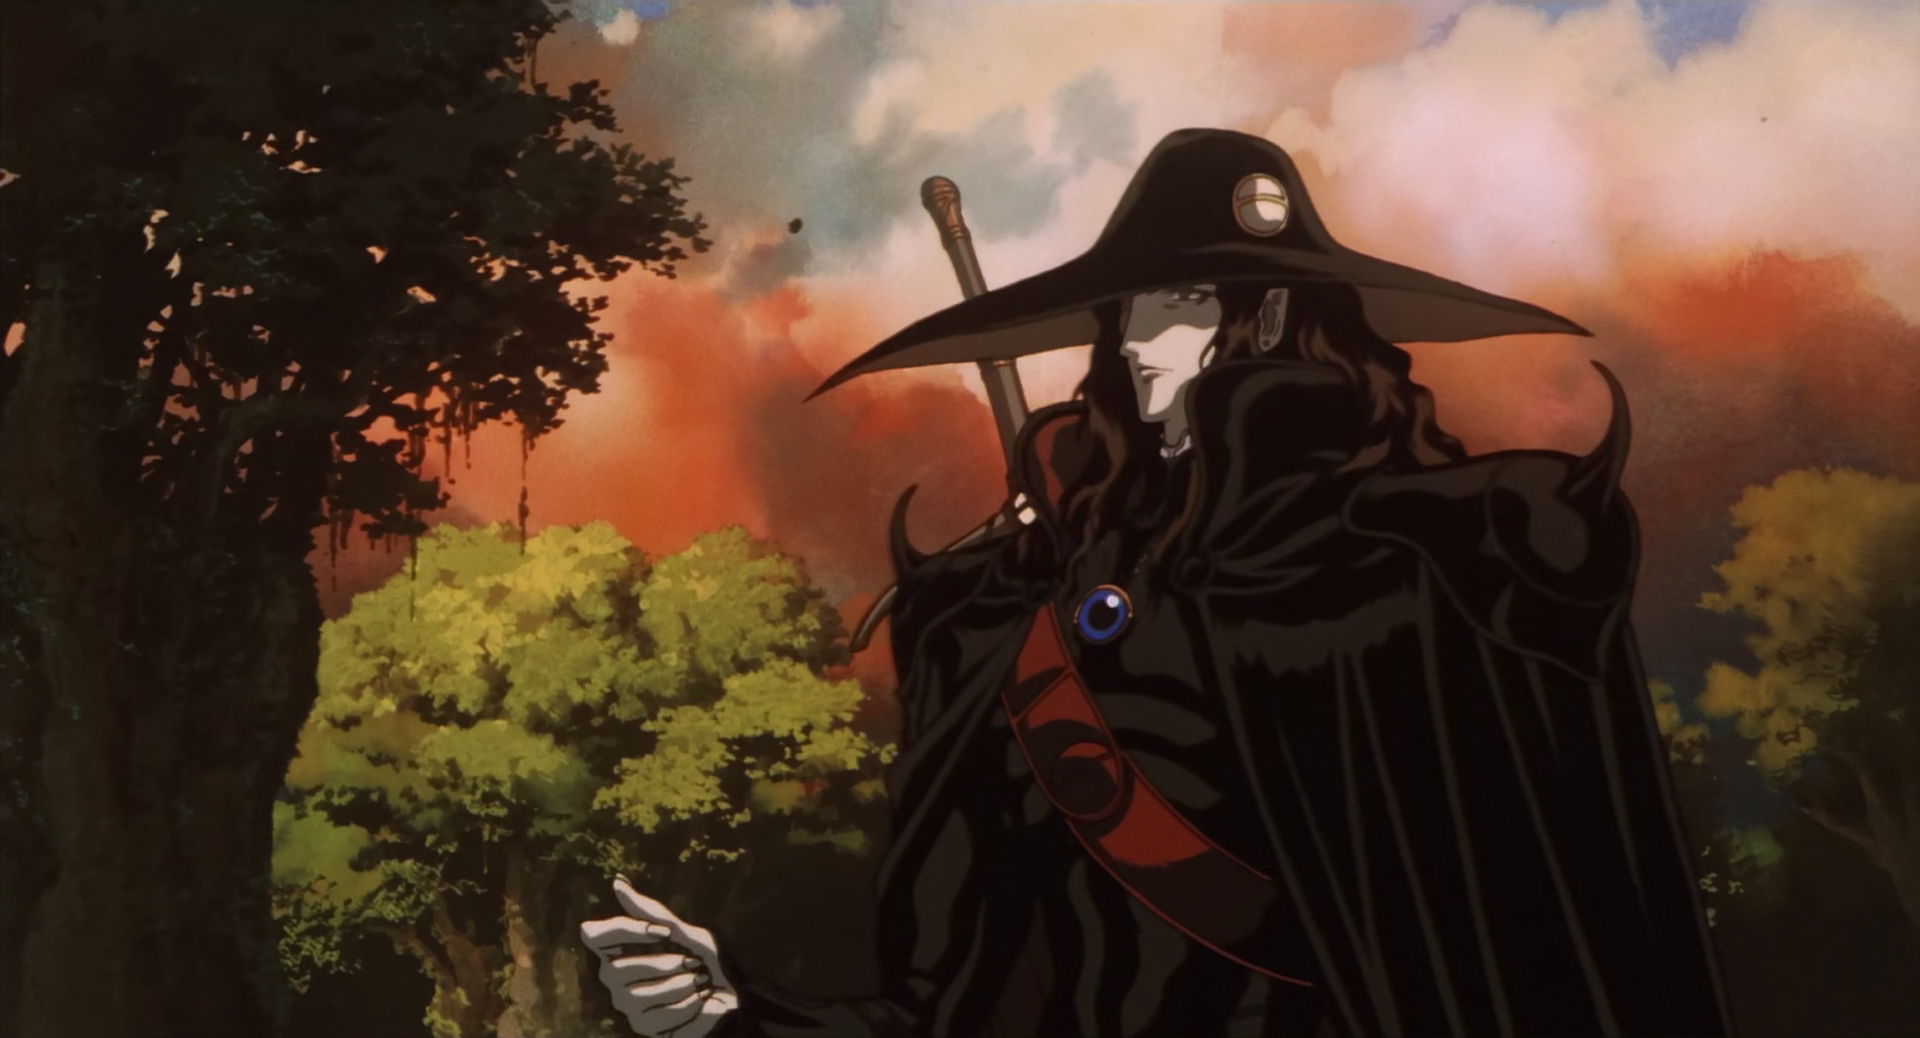 How The West Was Won Over By 'Vampire Hunter D' [Horrors Elsewhere] -  Bloody Disgusting